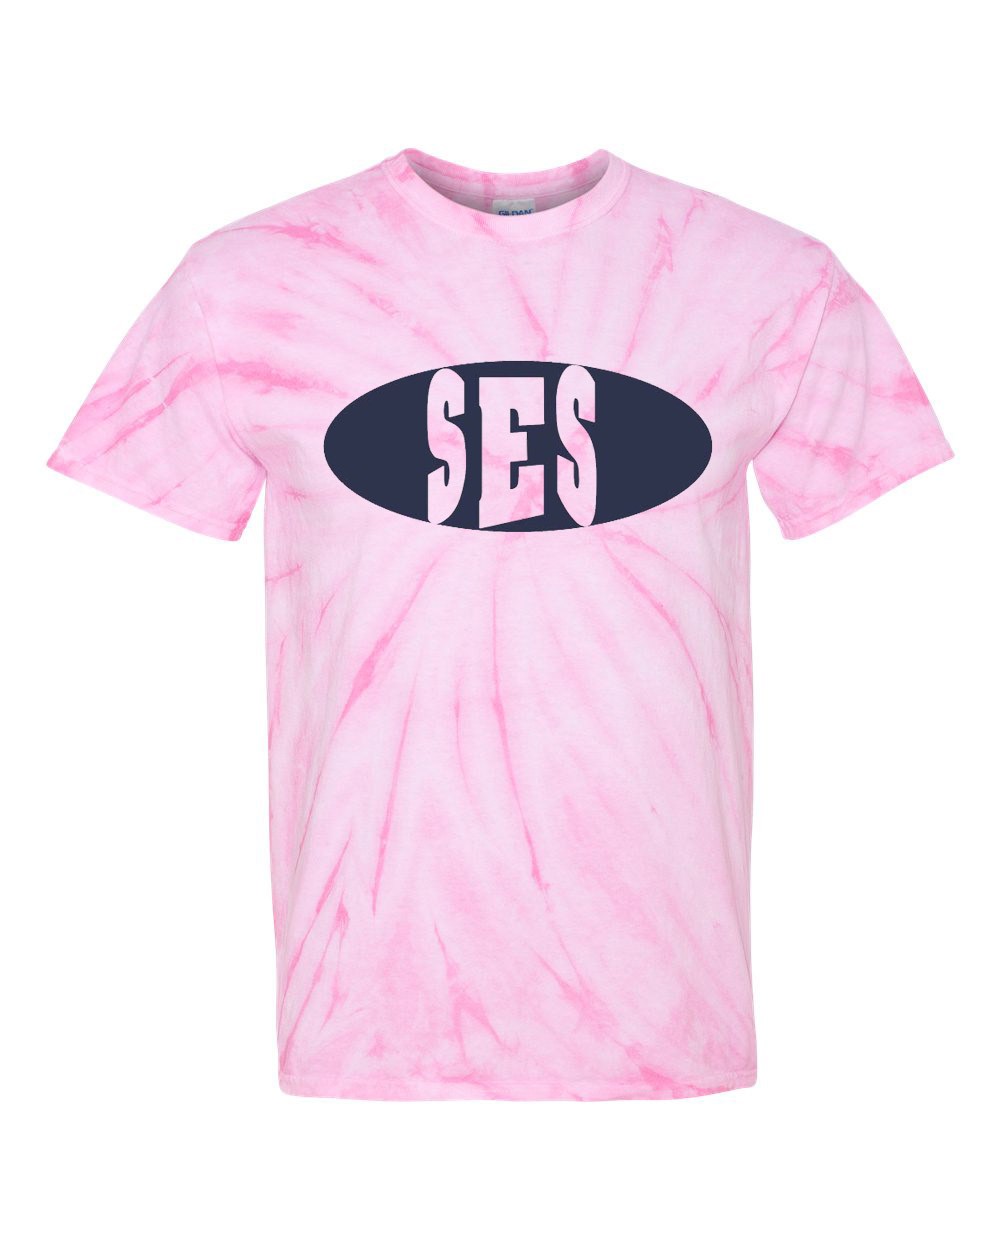 SES Spirit S/S Tie Dye T-Shirt w/ Navy Logo - Please Allow 2-3 Weeks for Delivery